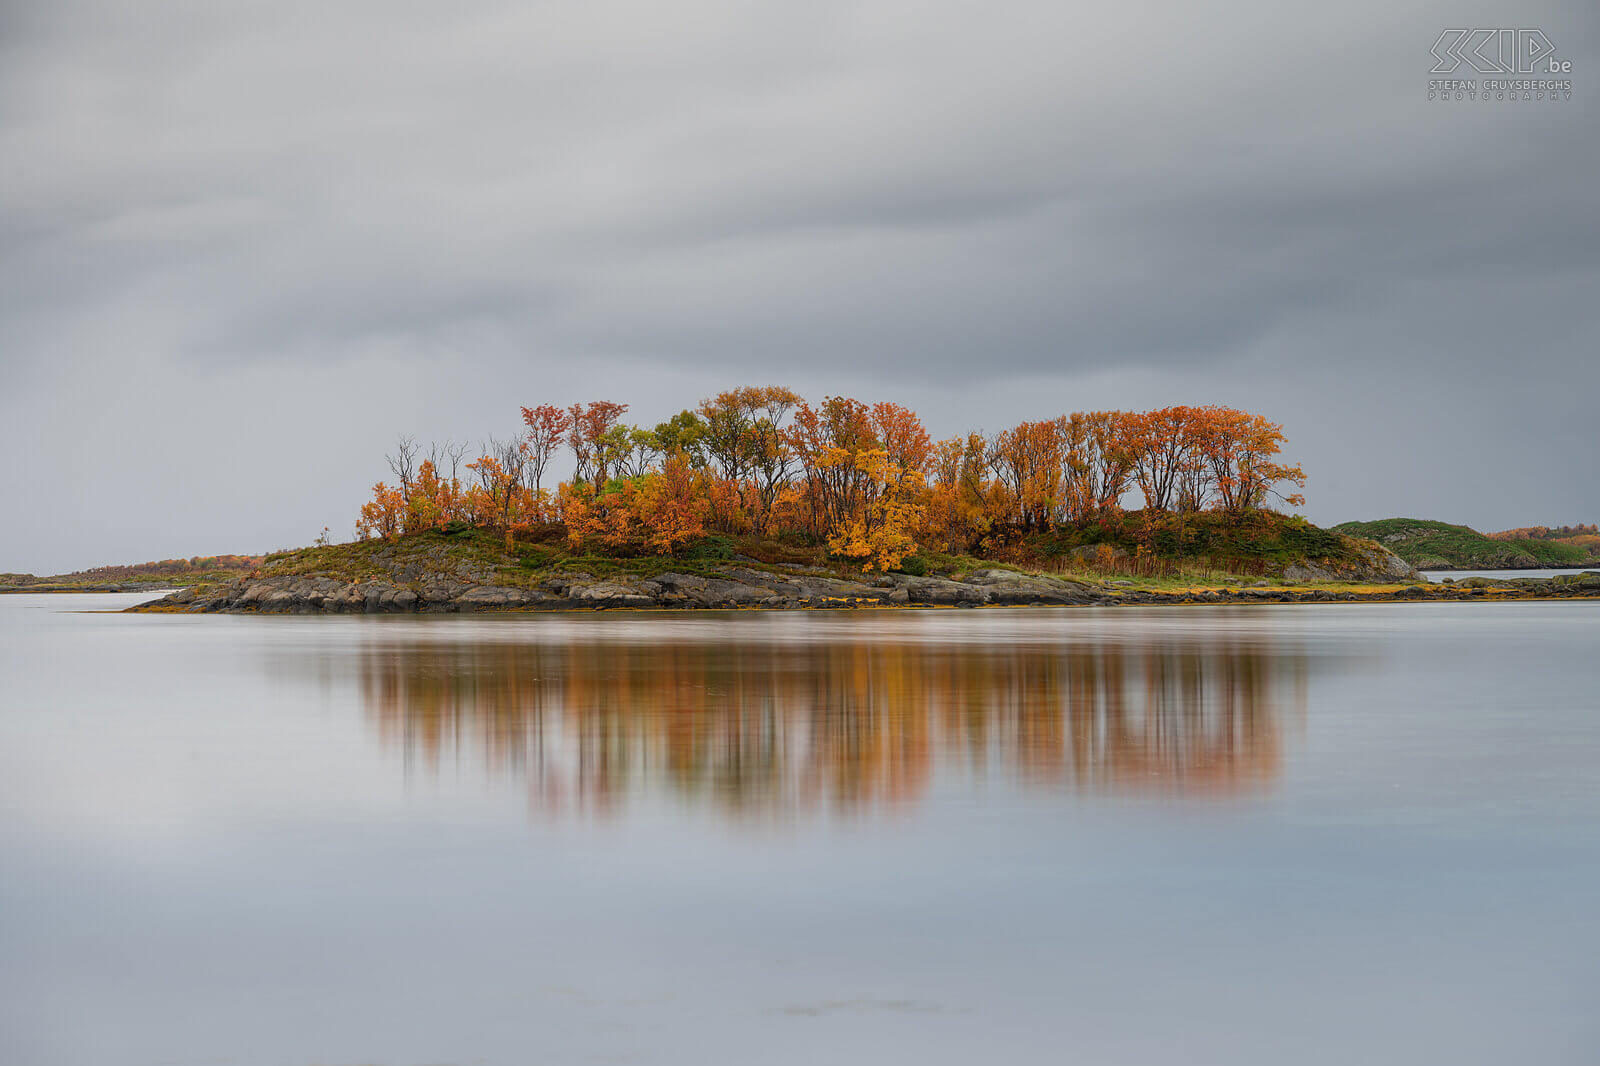 Senja - Hamn - Reflection Autumn colors and their reflection on a small island off the coast of Senja Stefan Cruysberghs